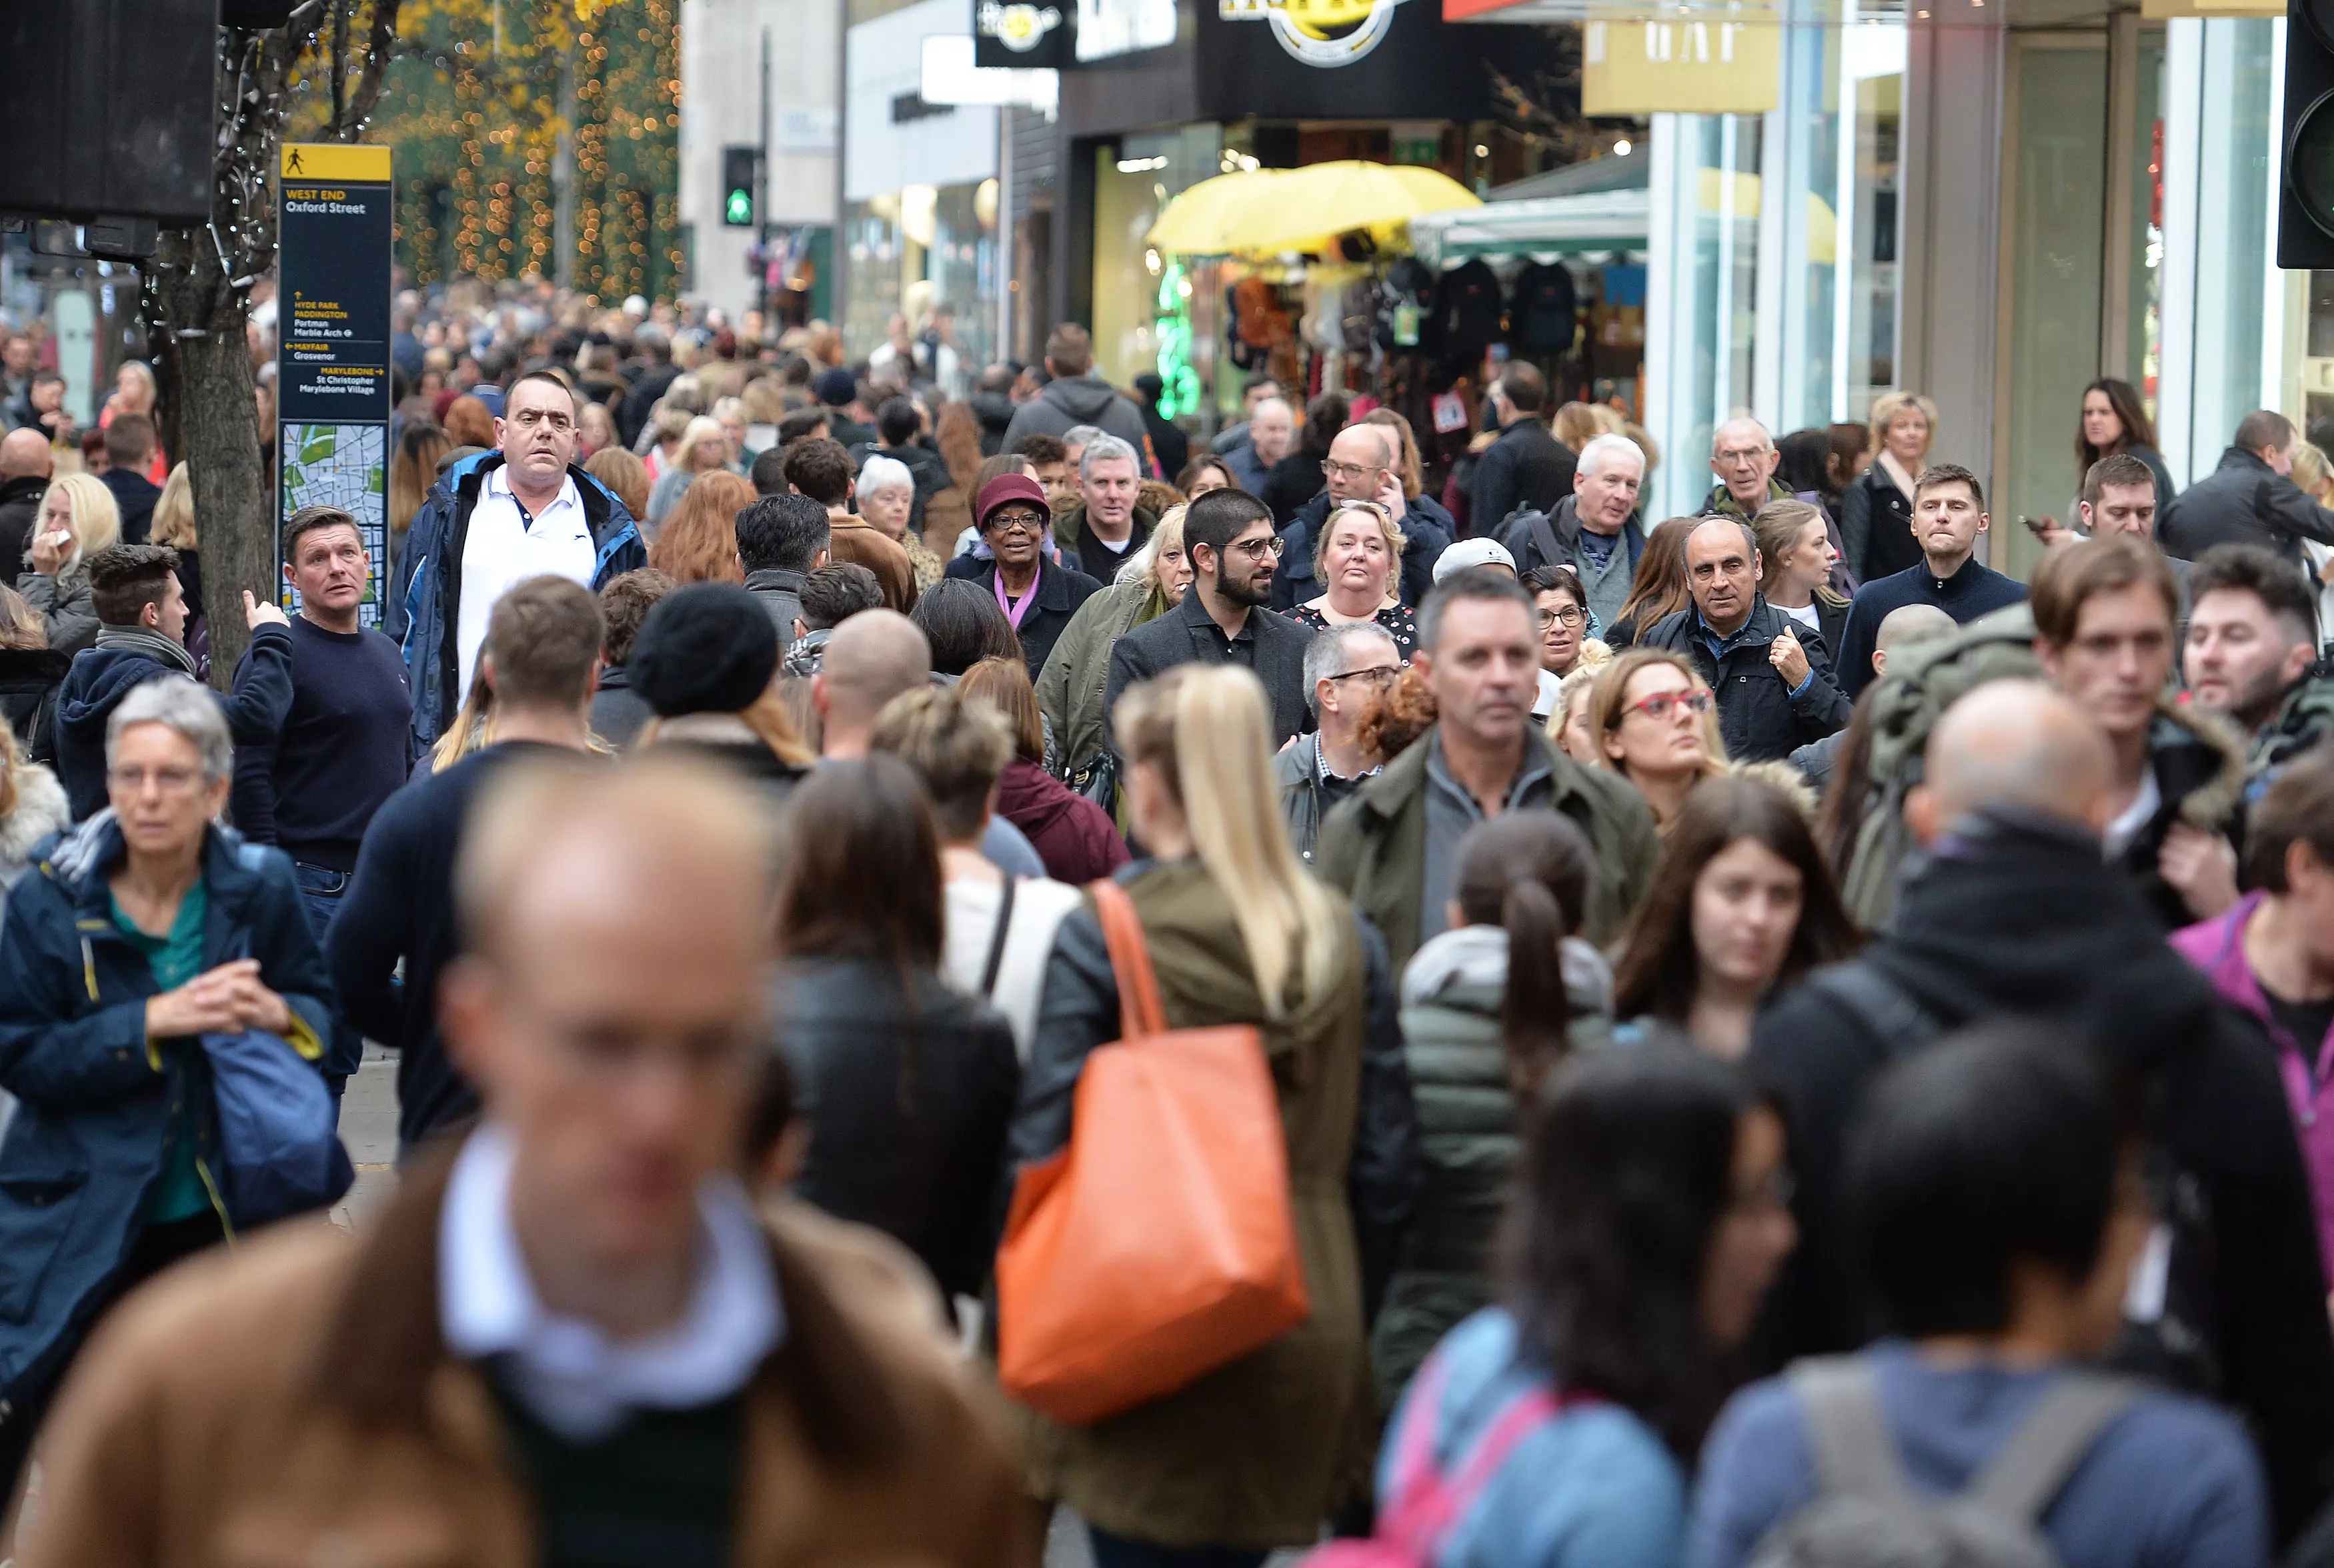 A Petition To Stop Shops Opening On Boxing Day Has 230,000+ Signatures